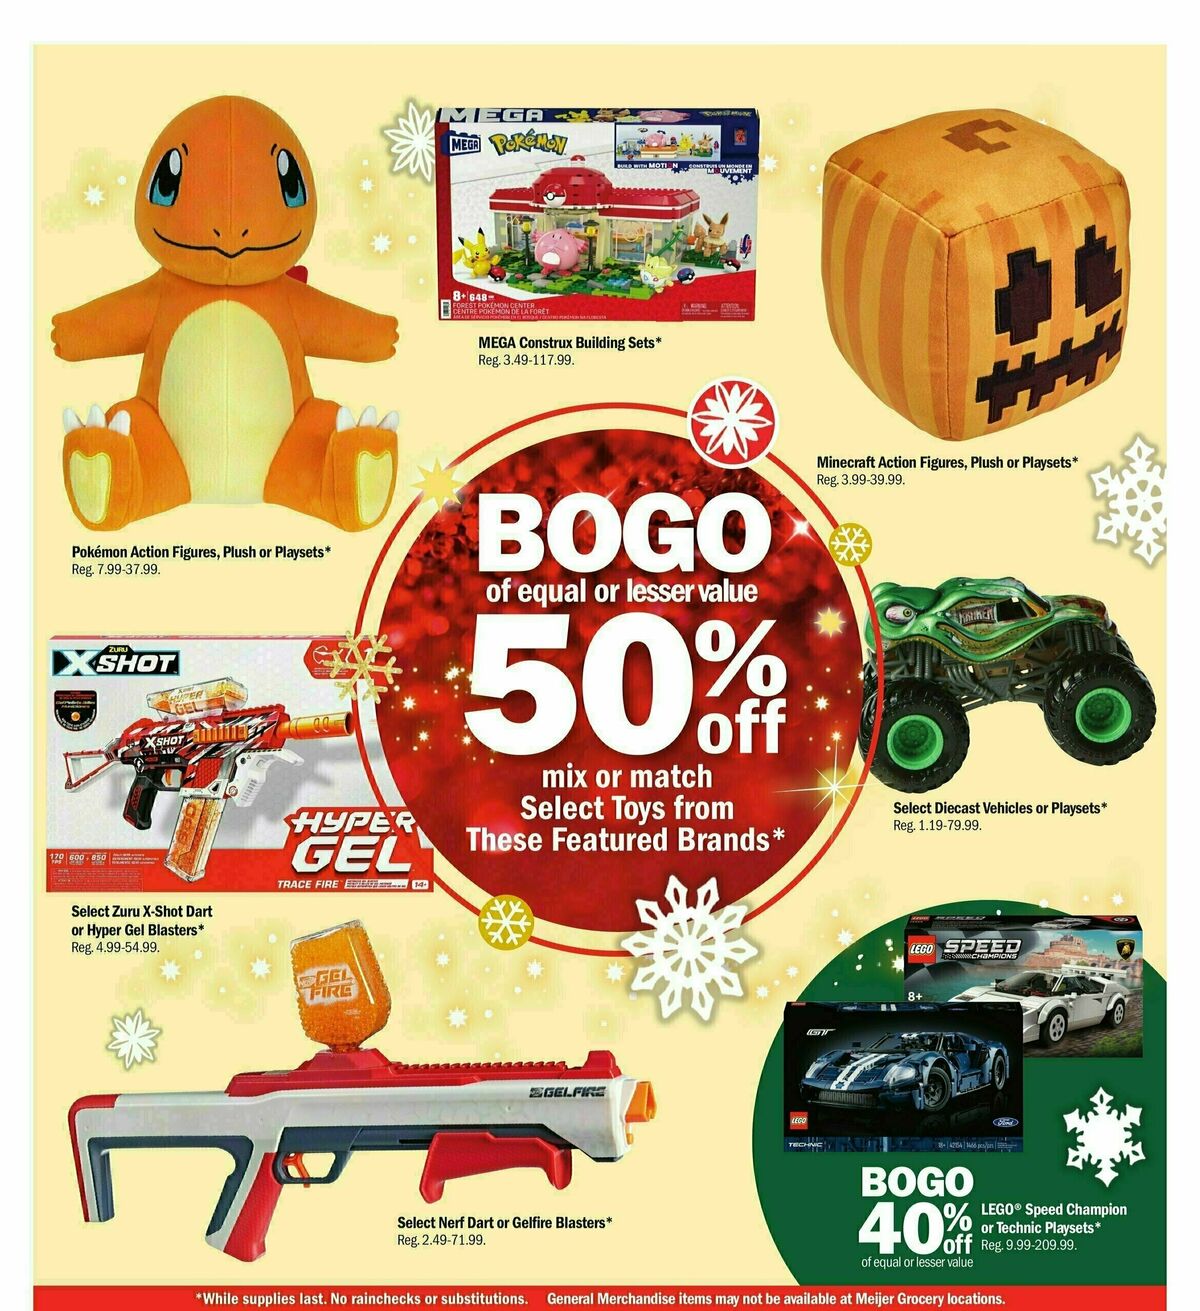 Meijer Holiday Ad Weekly Ad from December 3